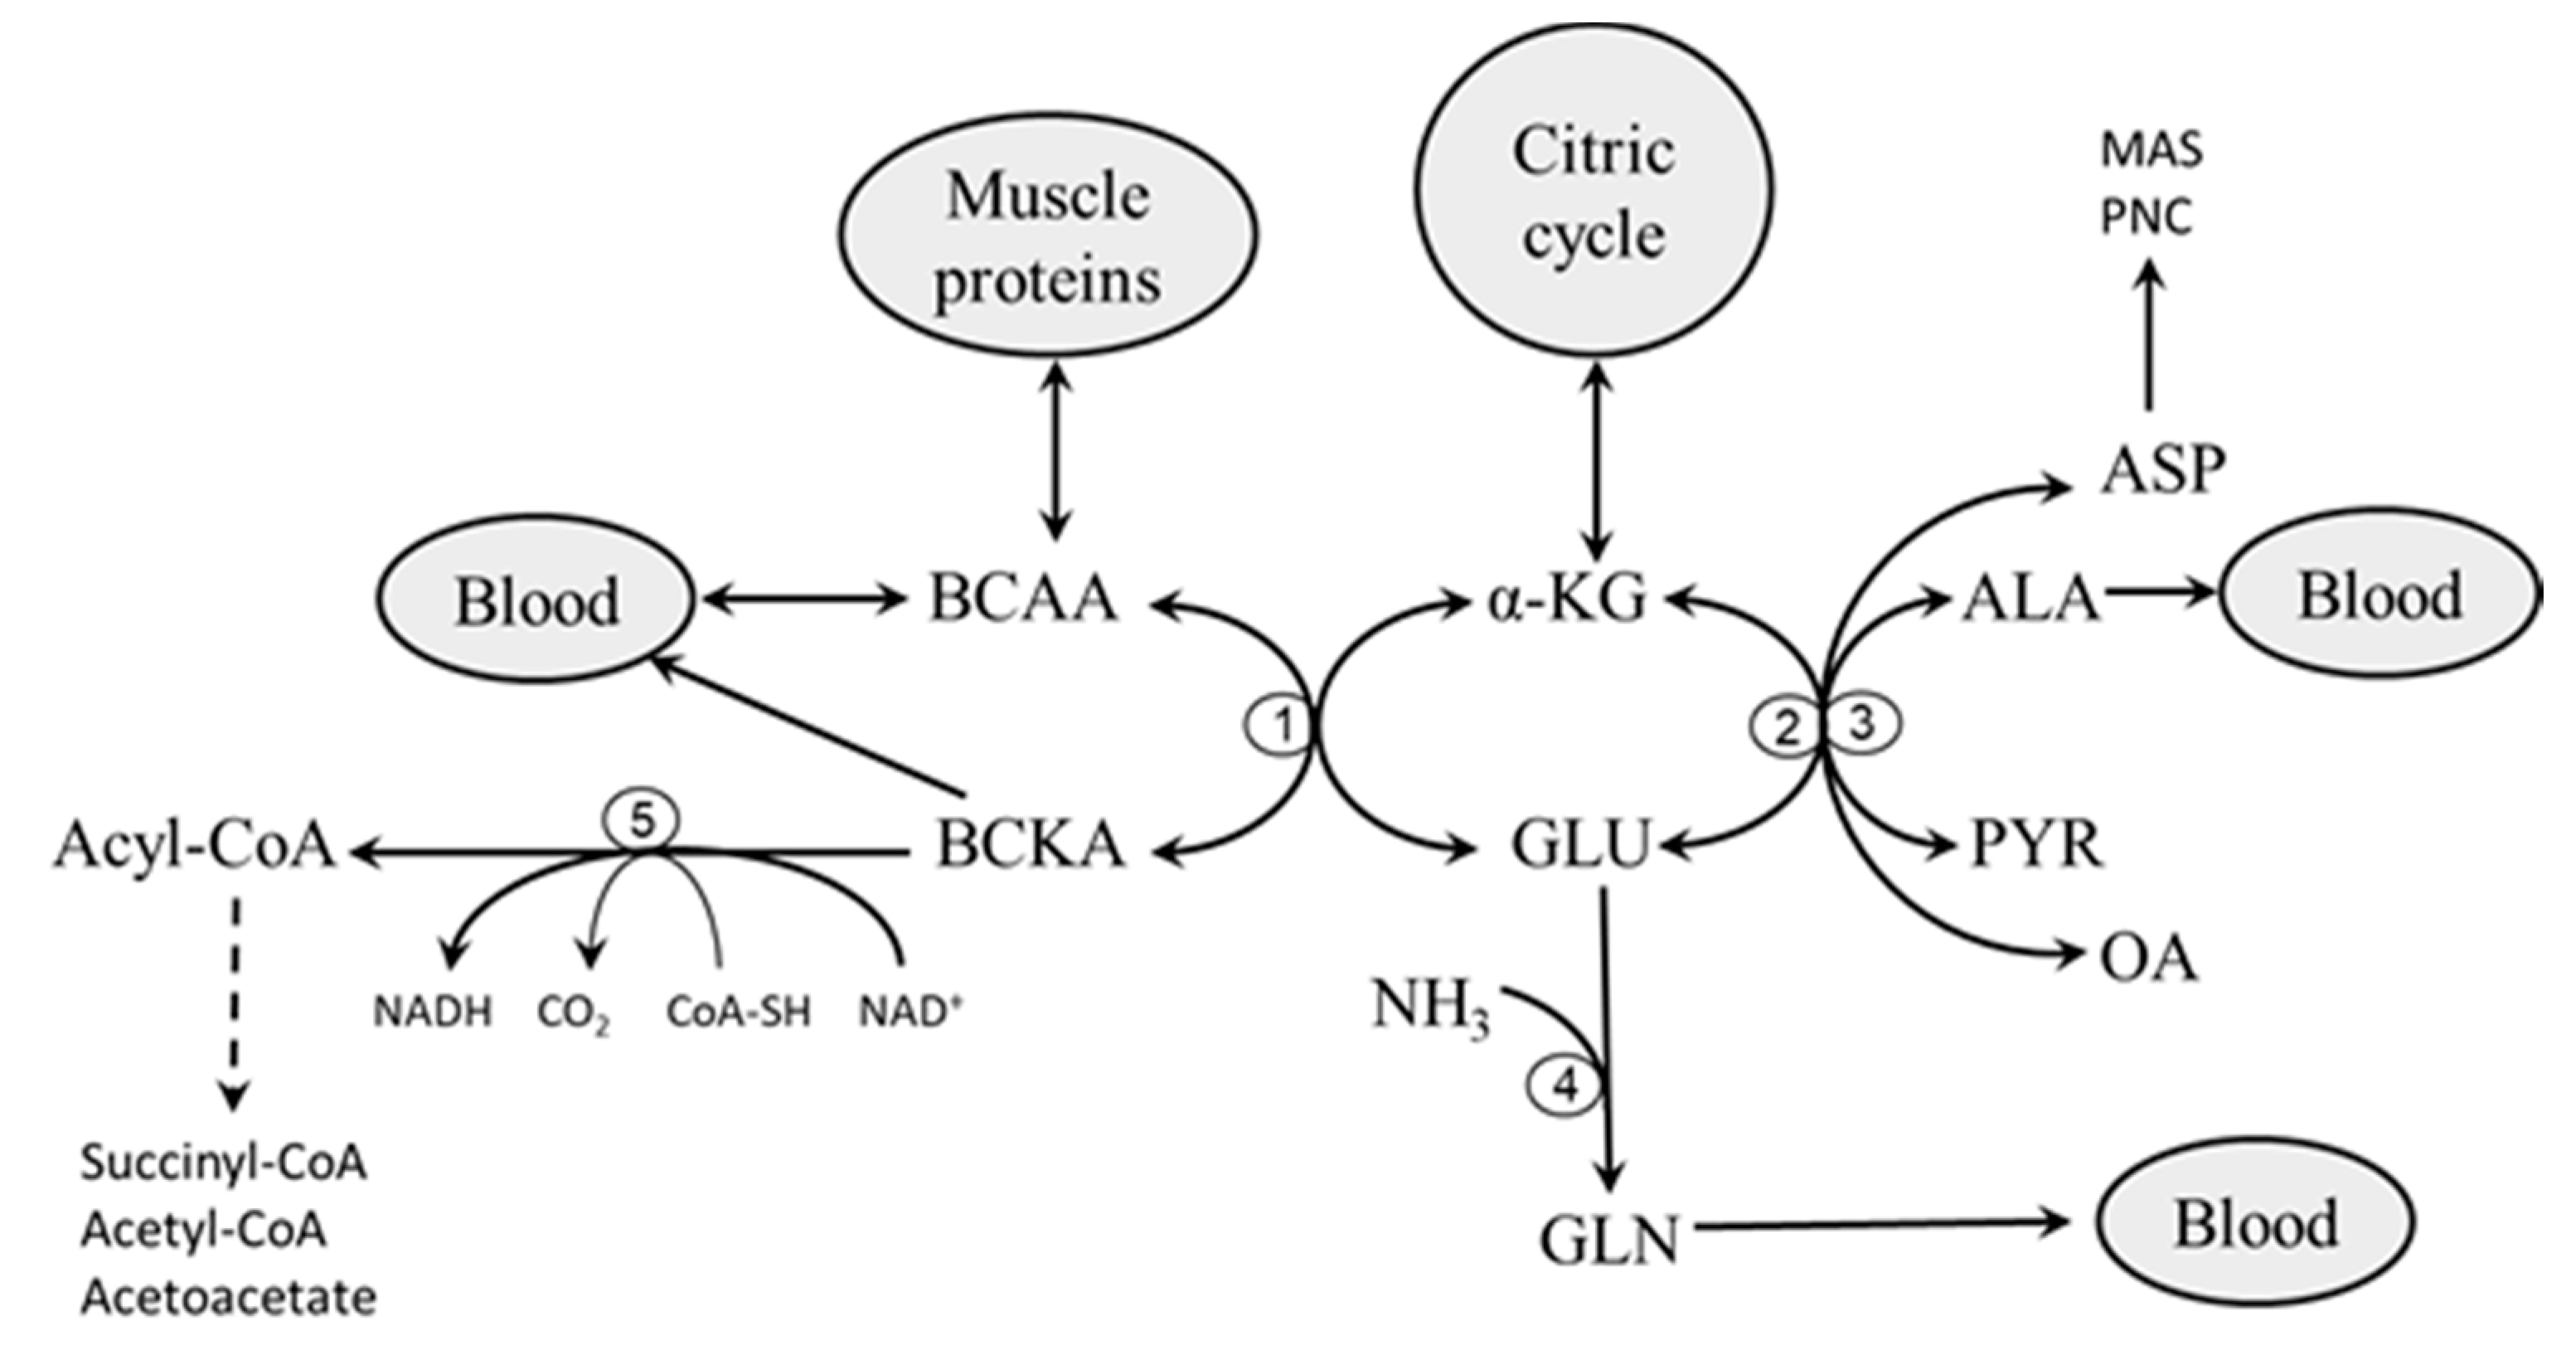 Branched-chain amino acids